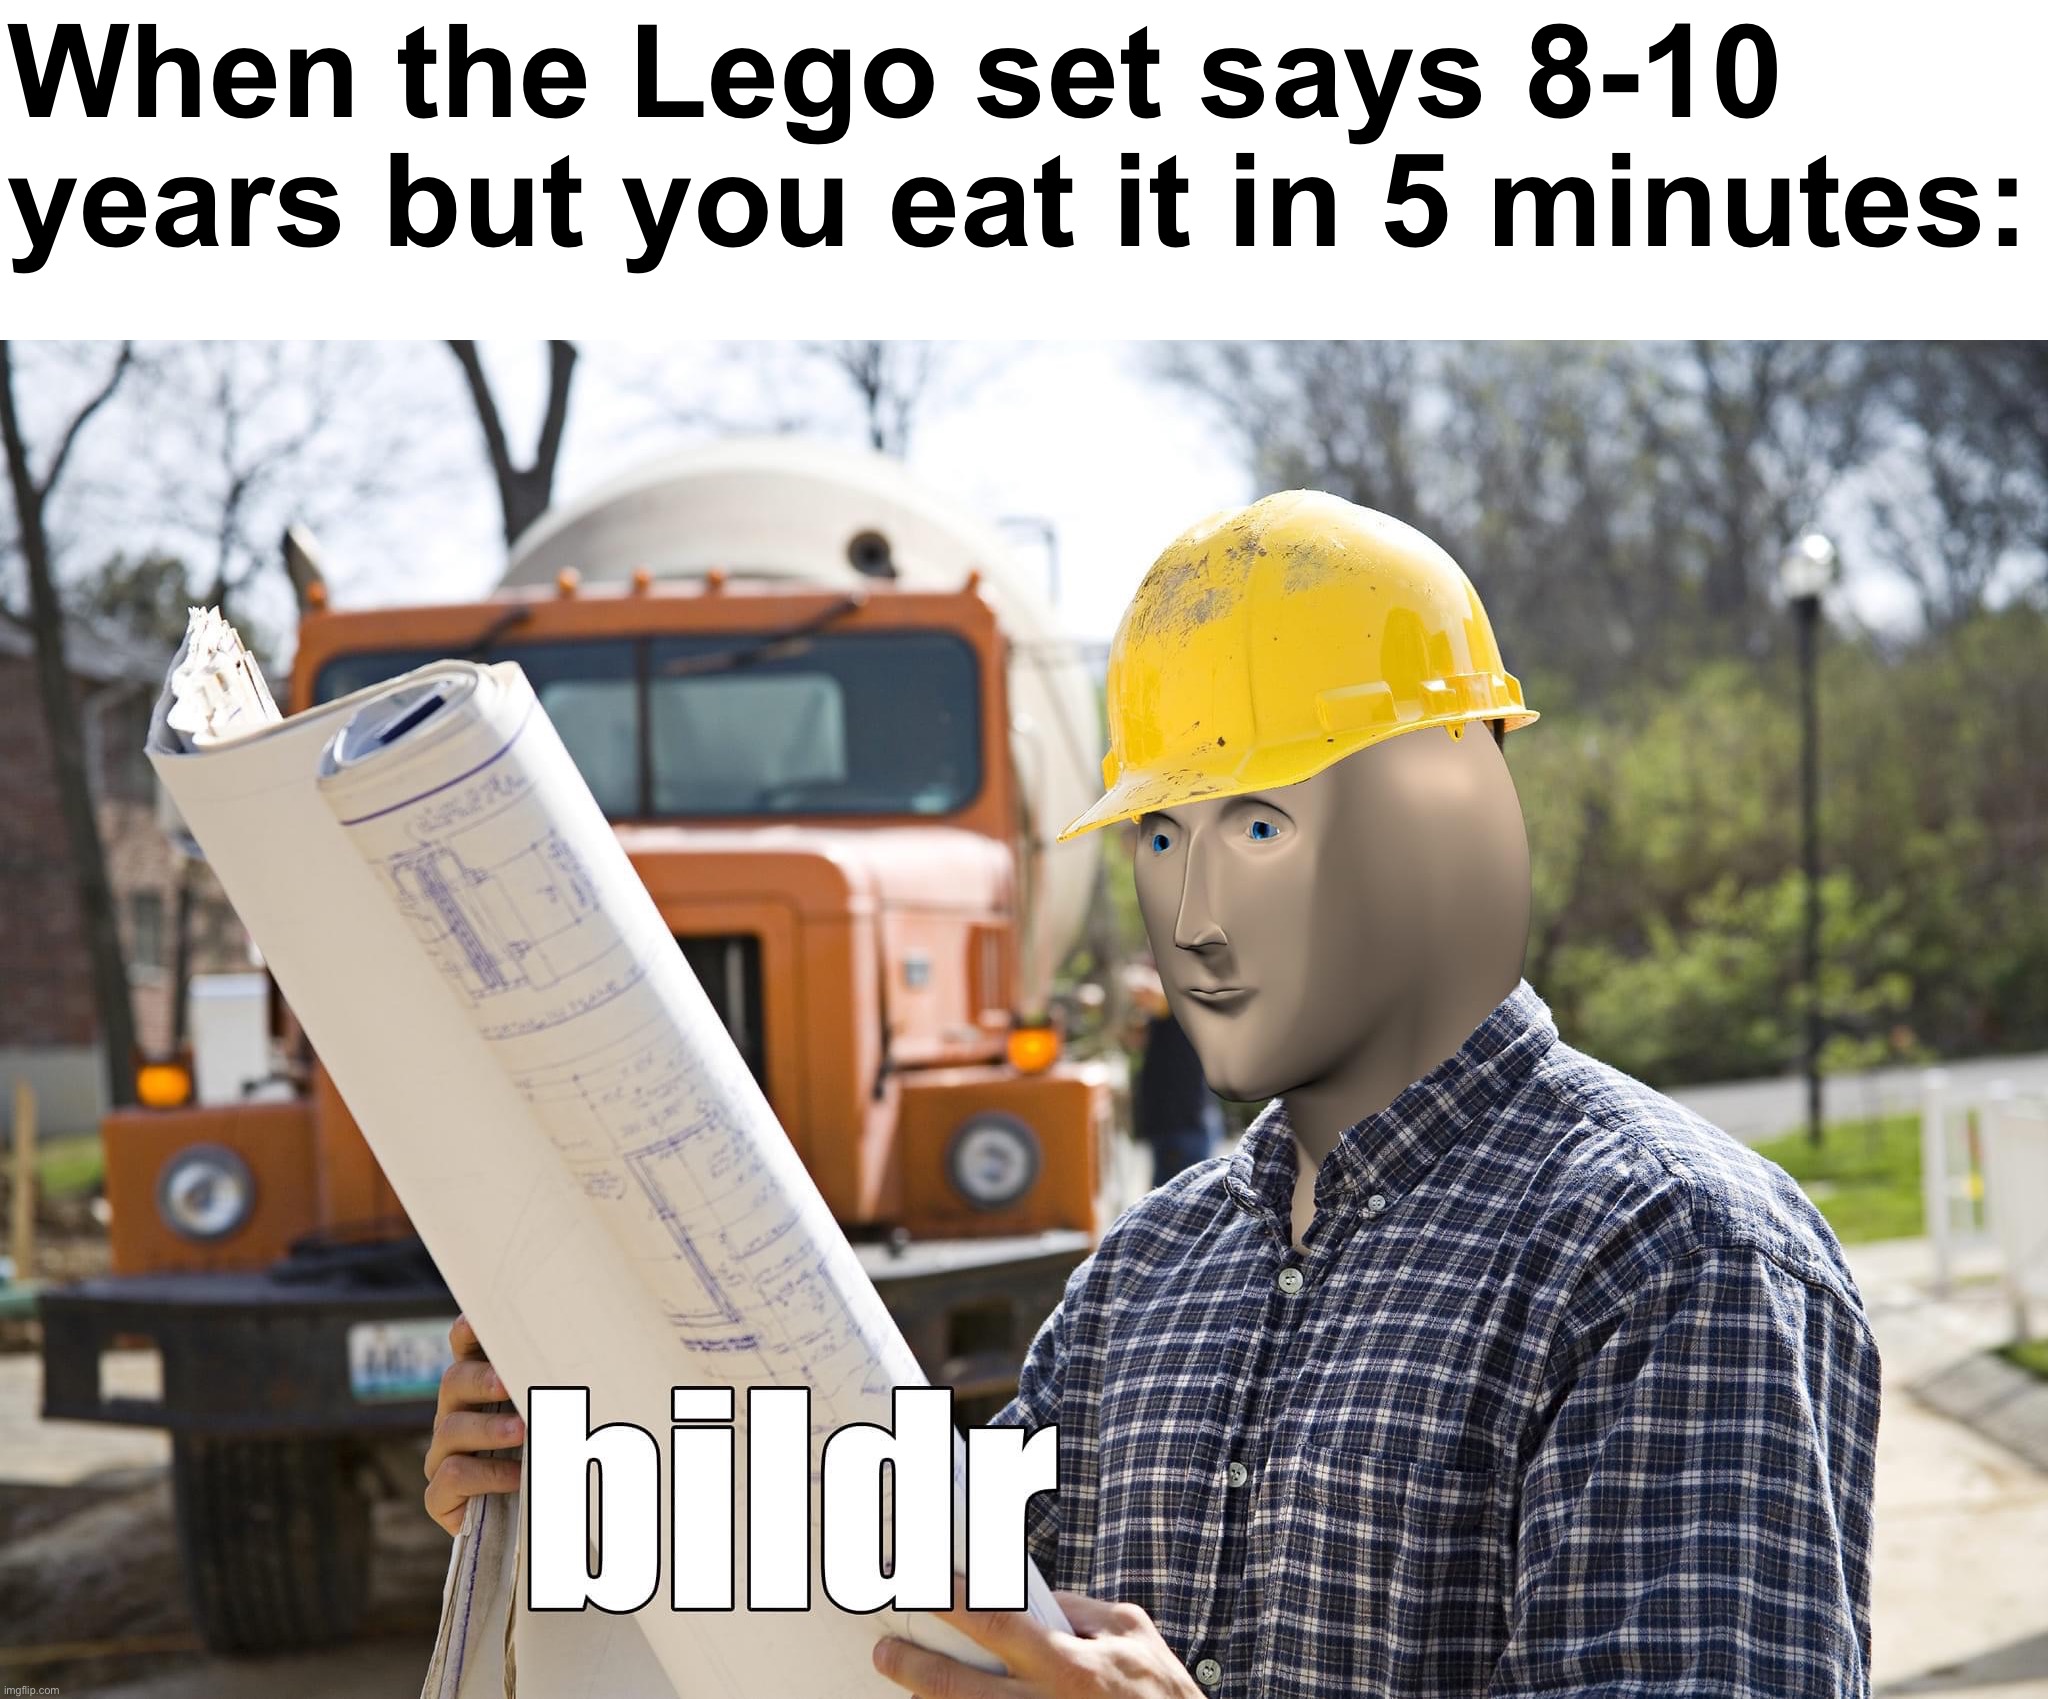 Meme man builder | When the Lego set says 8-10 years but you eat it in 5 minutes: | image tagged in meme man builder,lego,meme man | made w/ Imgflip meme maker